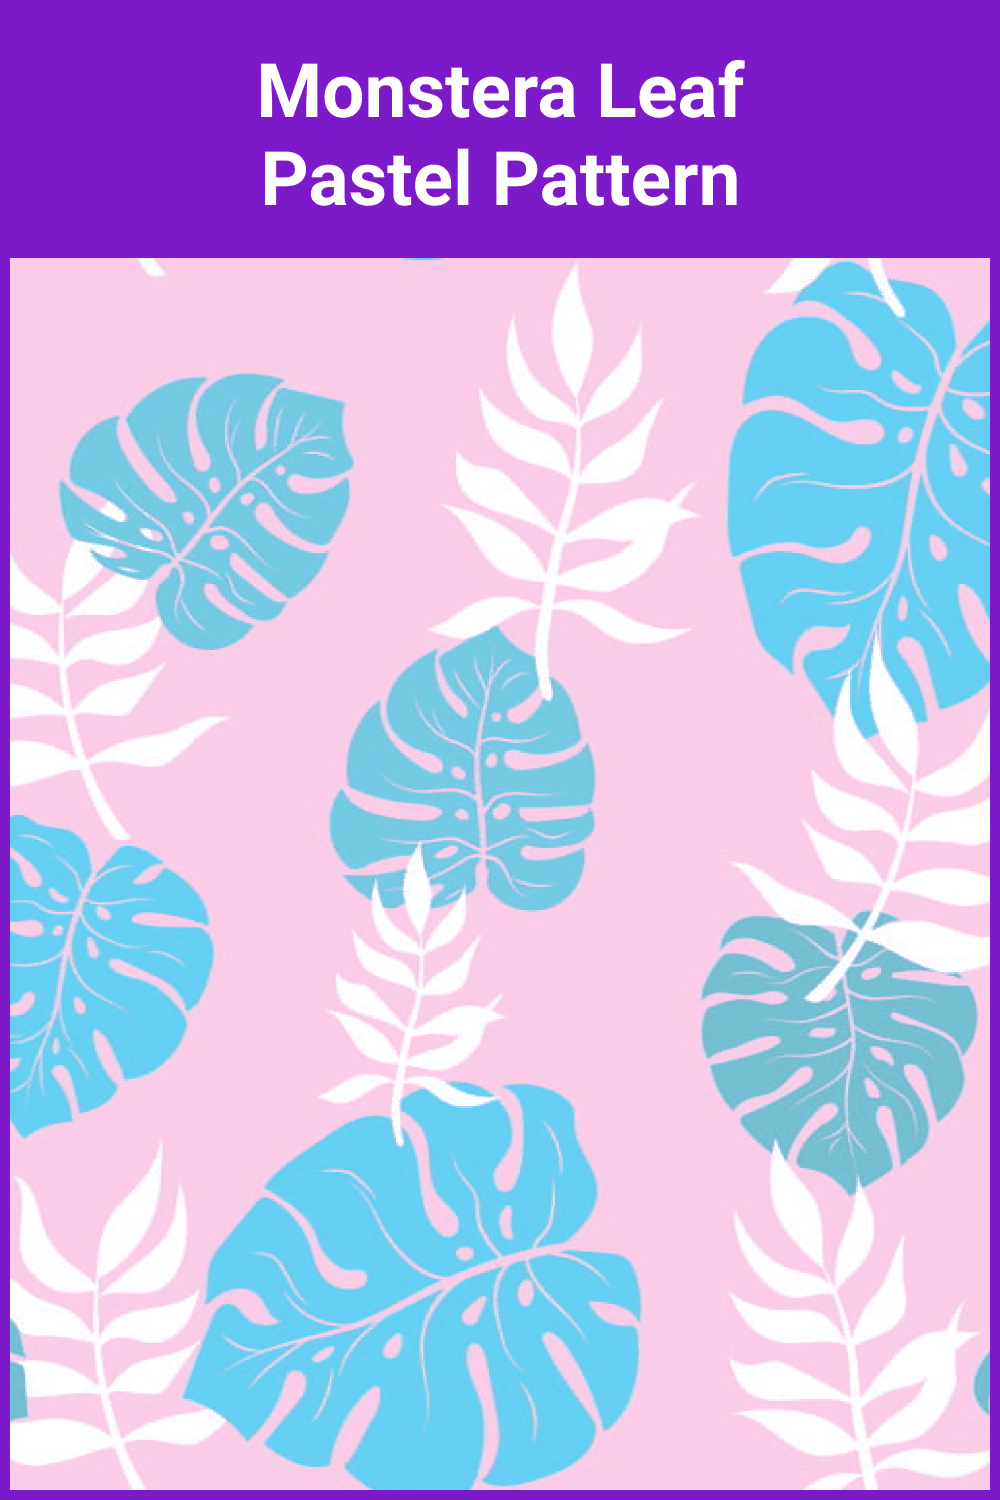 Monstera Leaf in white and blue colors on pink background.